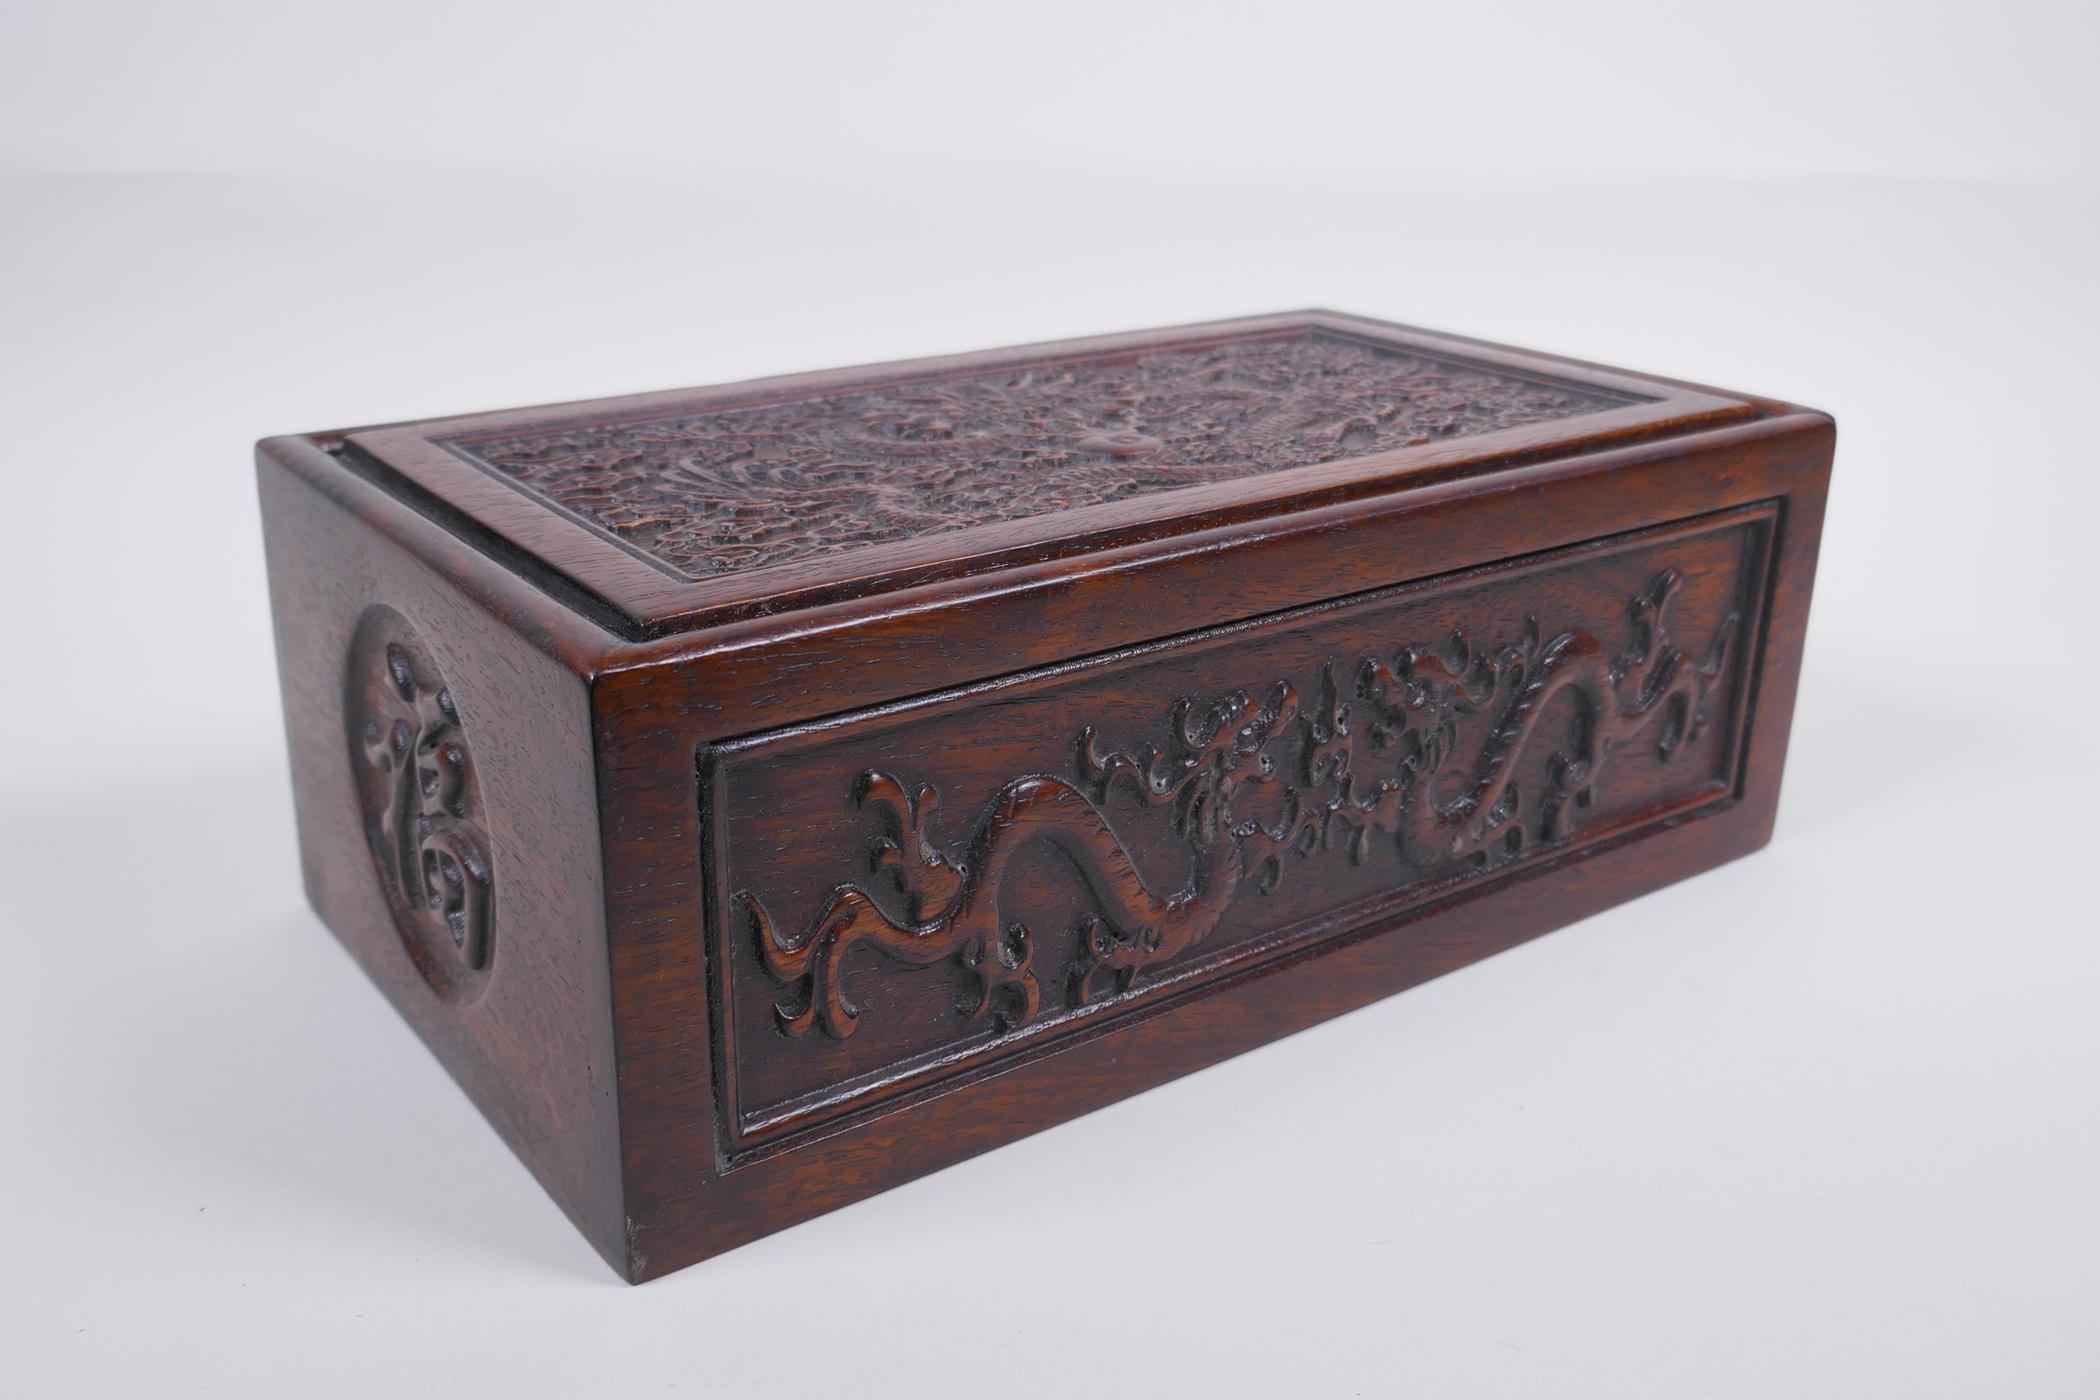 A Chinese carved hardwood box with dragon and character decoration, 28 x 16cm